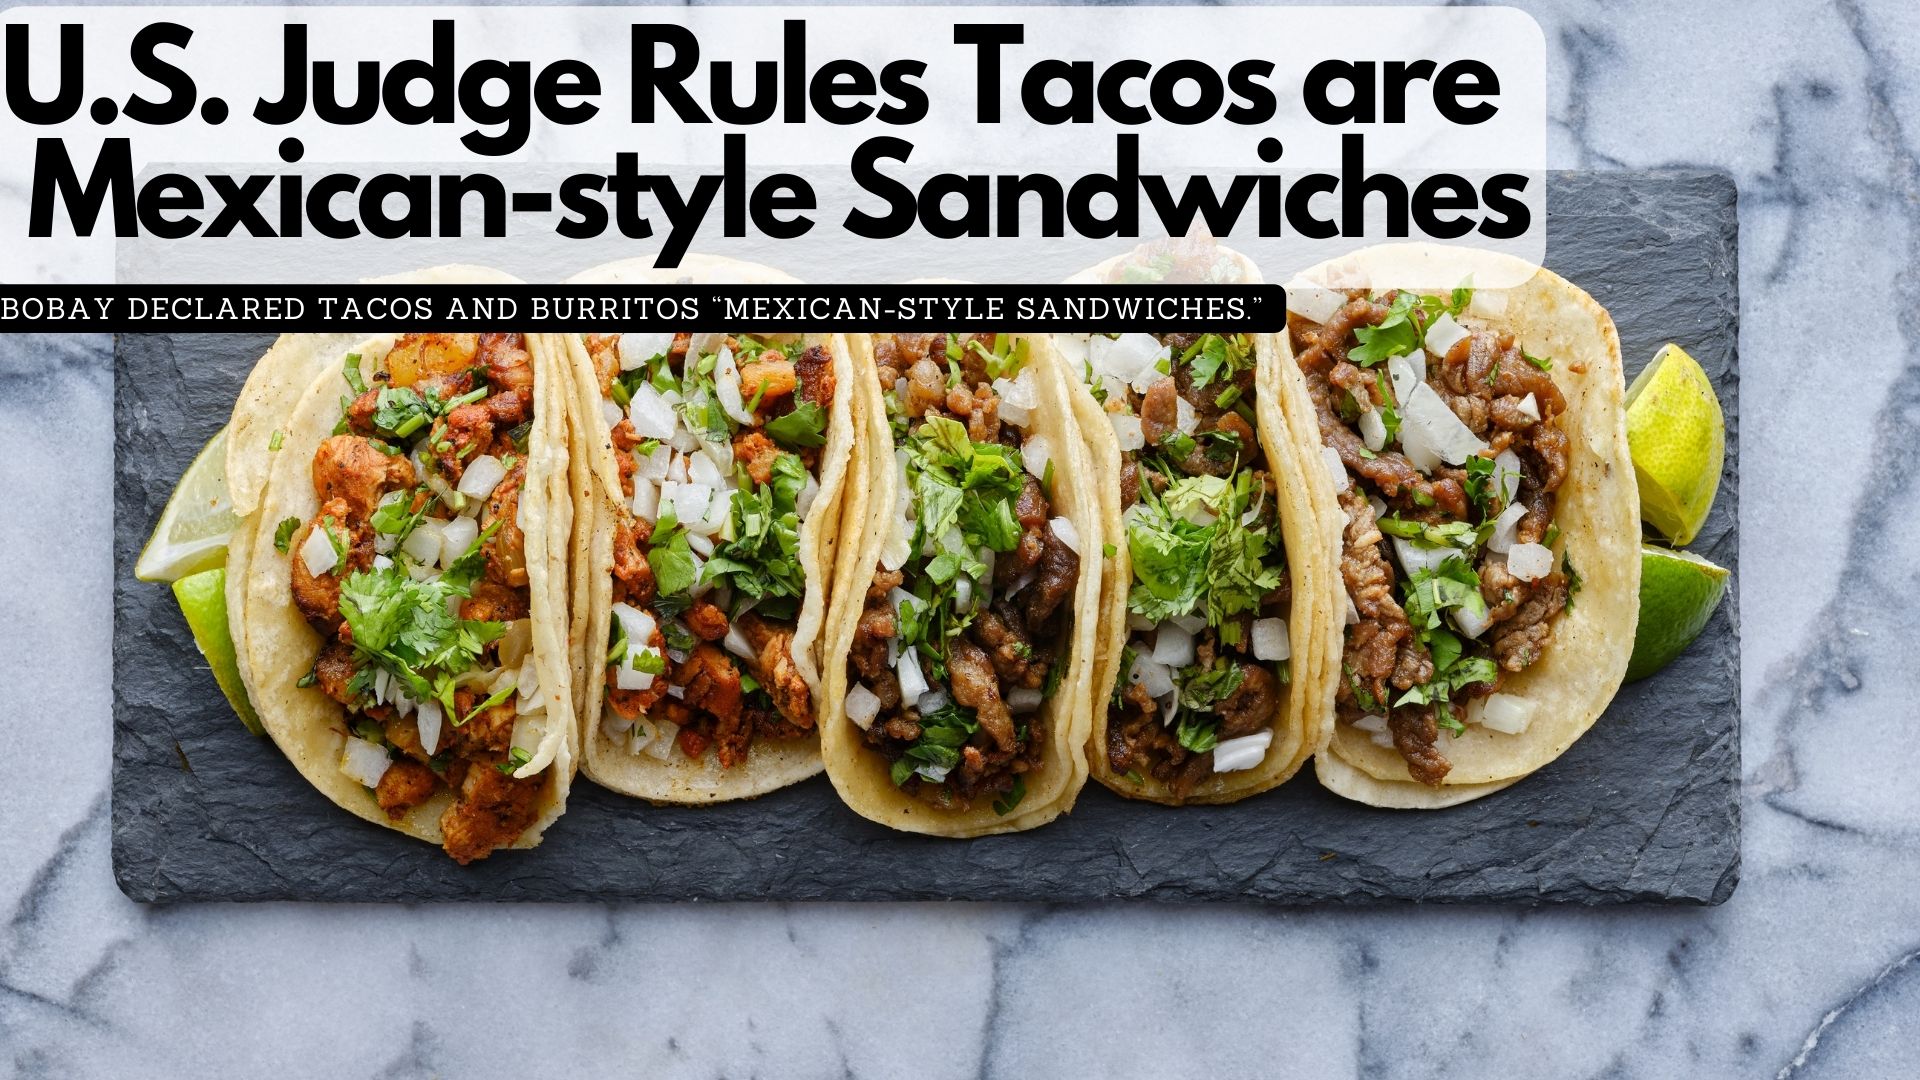 A U.S. judge rules that tacos and burritos are Mexican-style sandwiches.